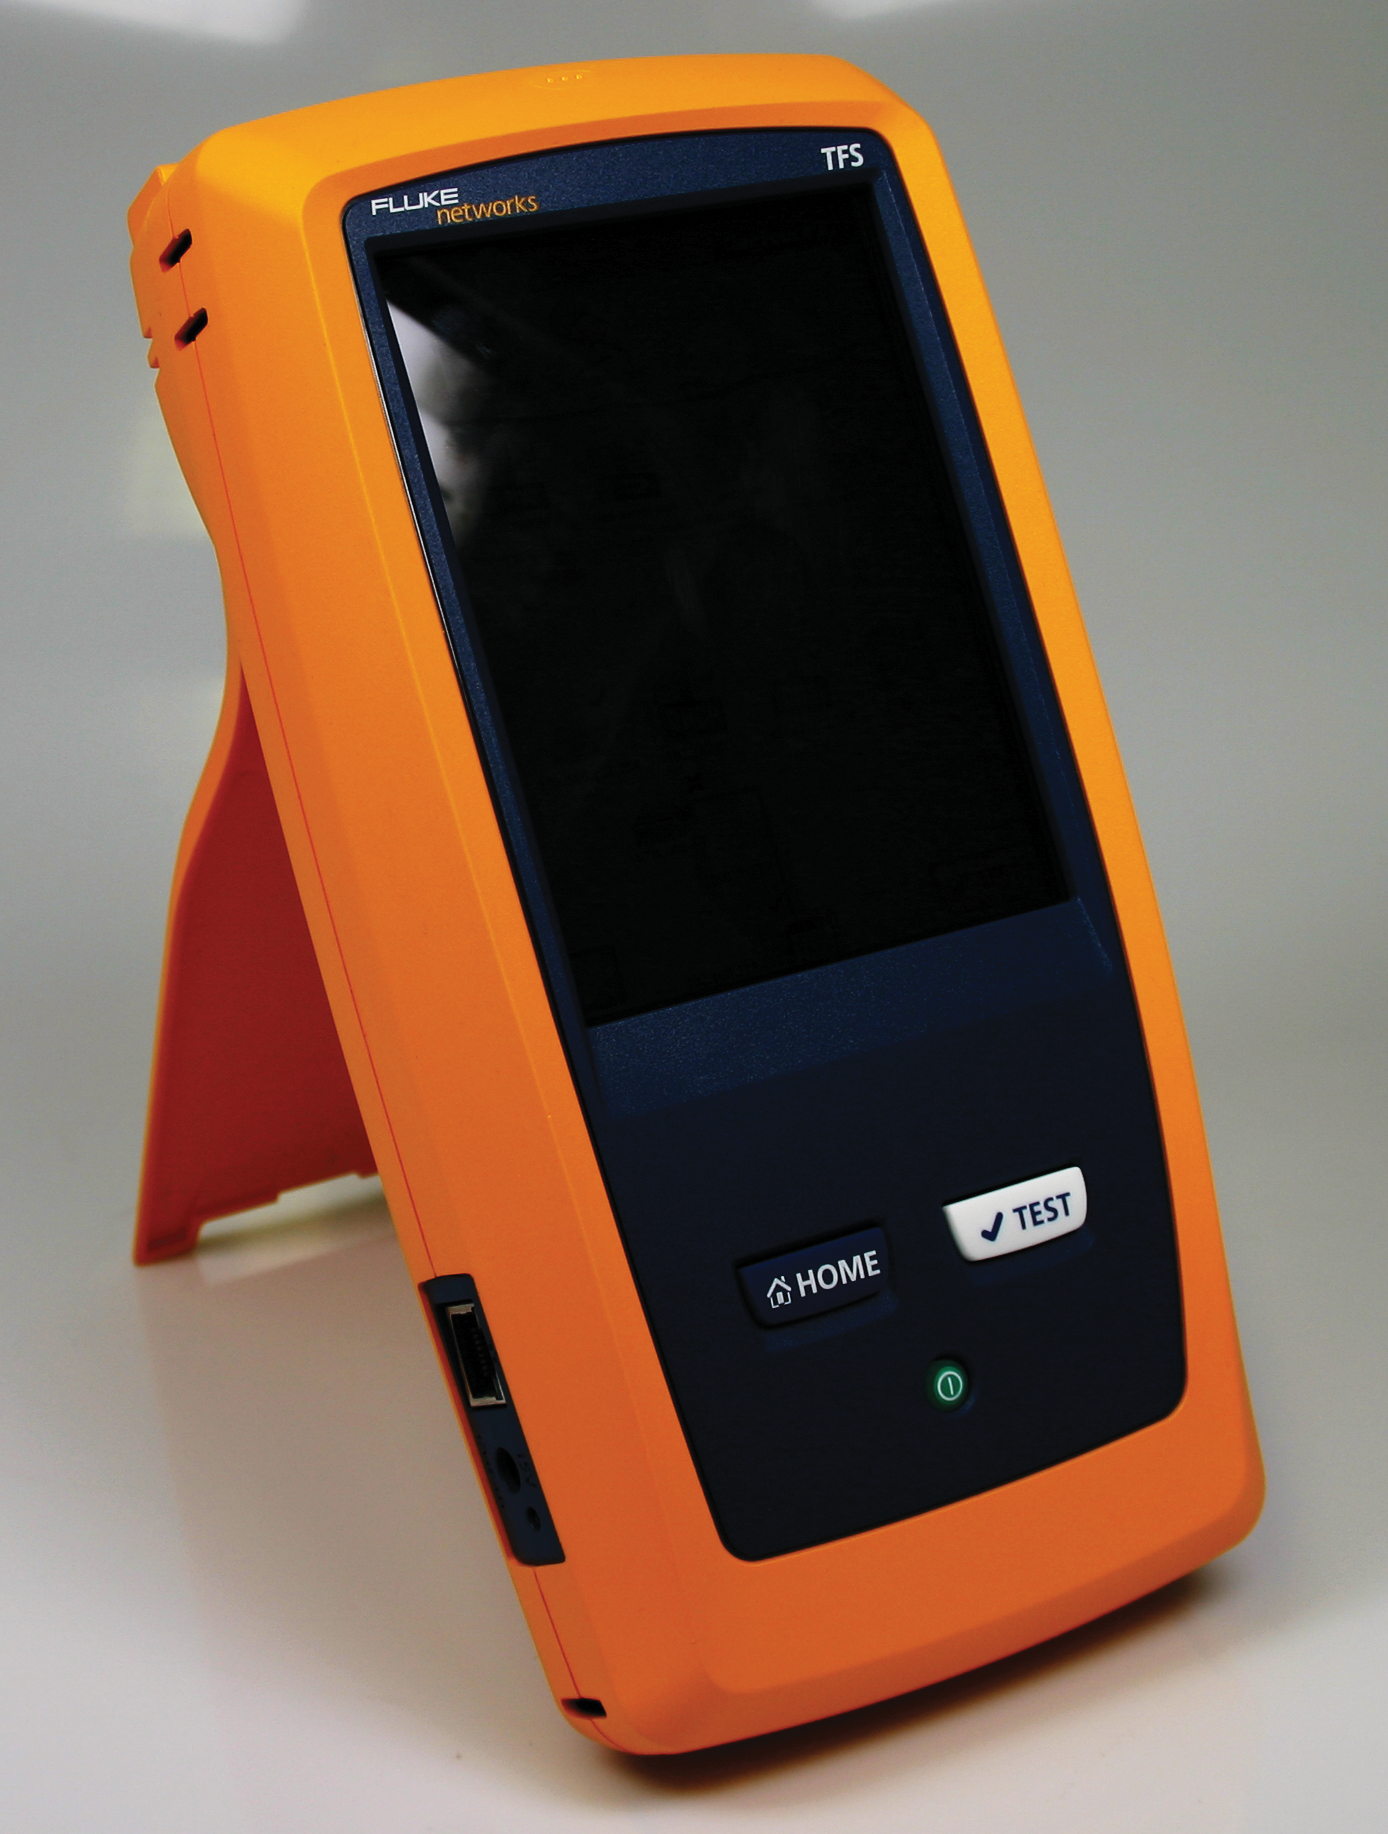 The OneTouch AT network tester by Fluke Networks. The device has a large touchscreen and needs a fan. 